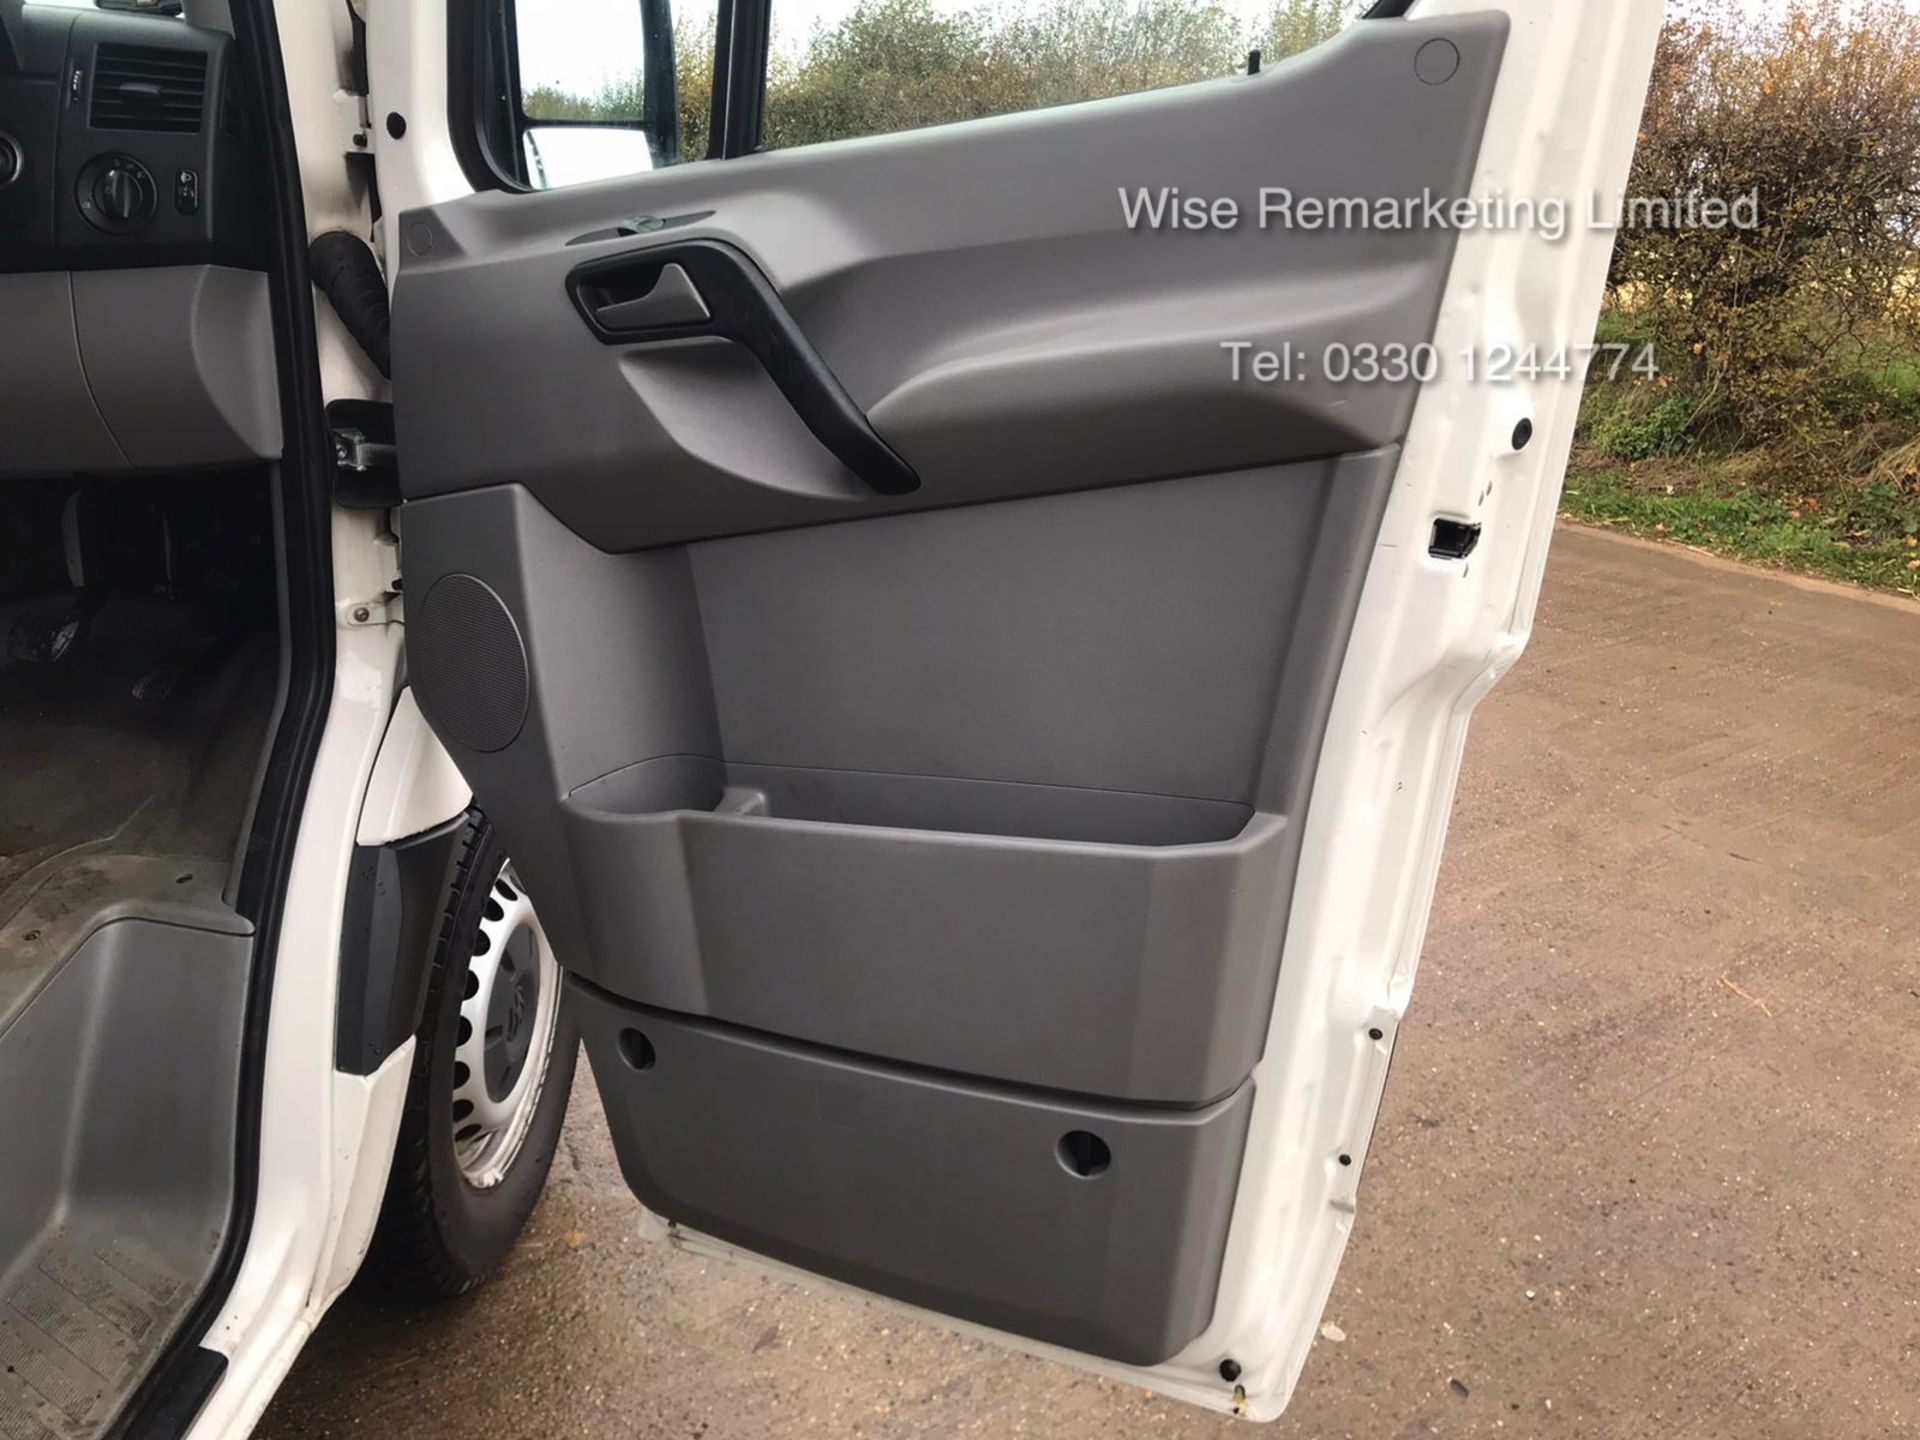 Volkswagen Crafter CR35 Startline 2.0l TDi - LWB - 2016 Model - 1 Keeper From New - Service History - Image 8 of 15